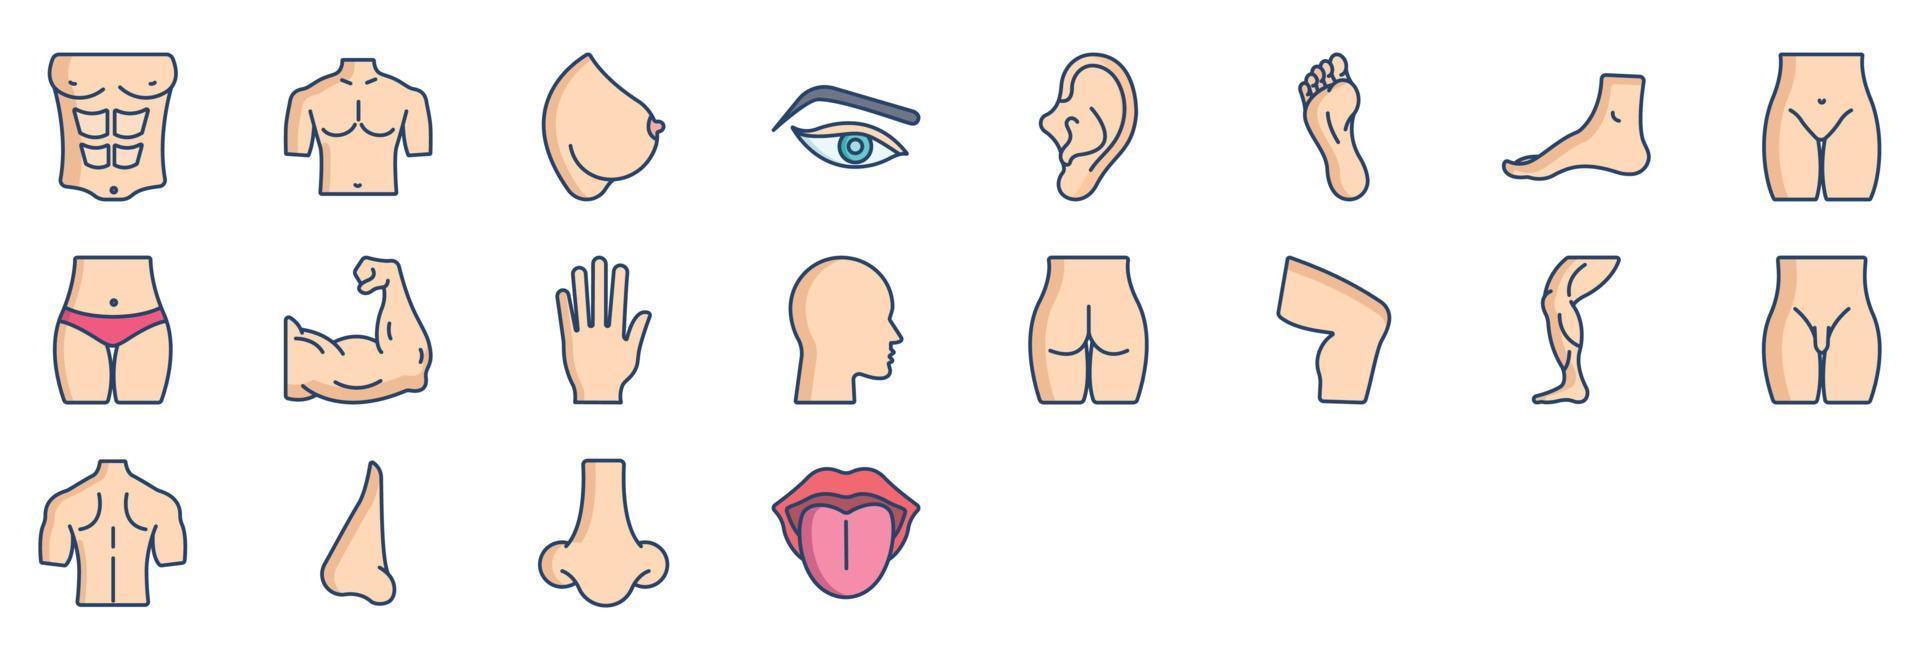 Collection of icons related to Human Body Parts, including icons like Body, Brest, Eye, Eyes and more. vector illustrations, Pixel Perfect set